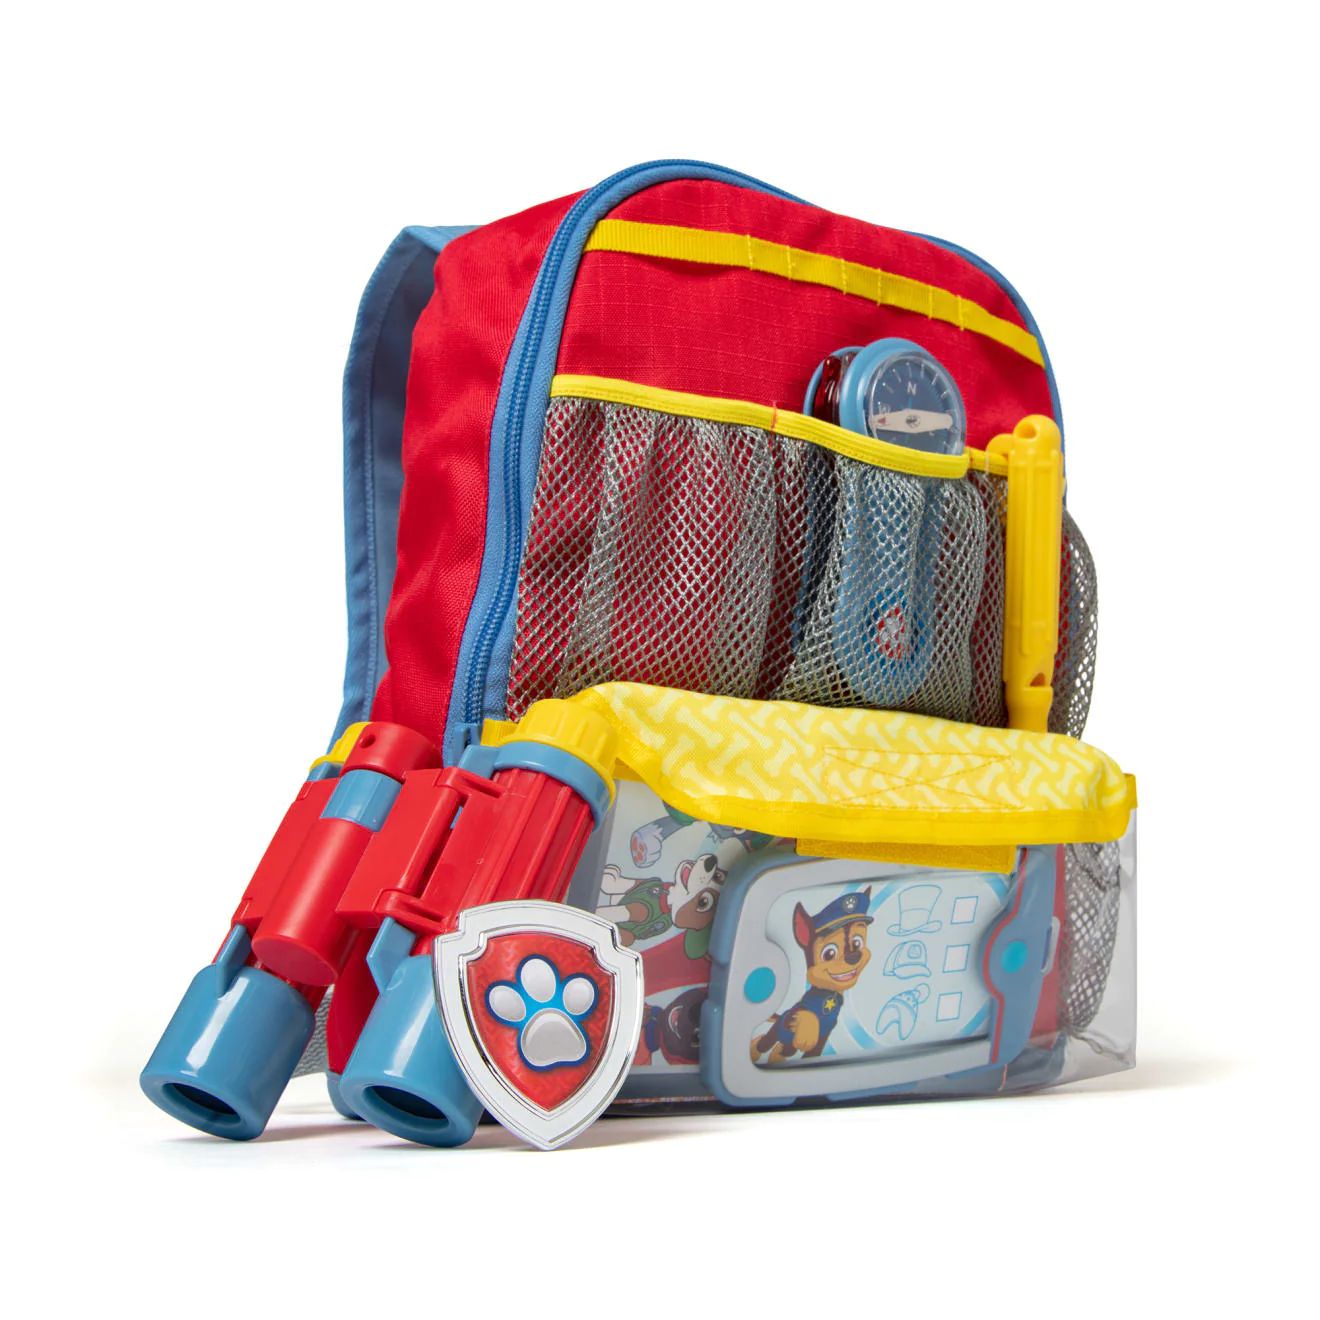 PAW Patrol Pup Pack Backpack Role Play Set | Melissa and Doug